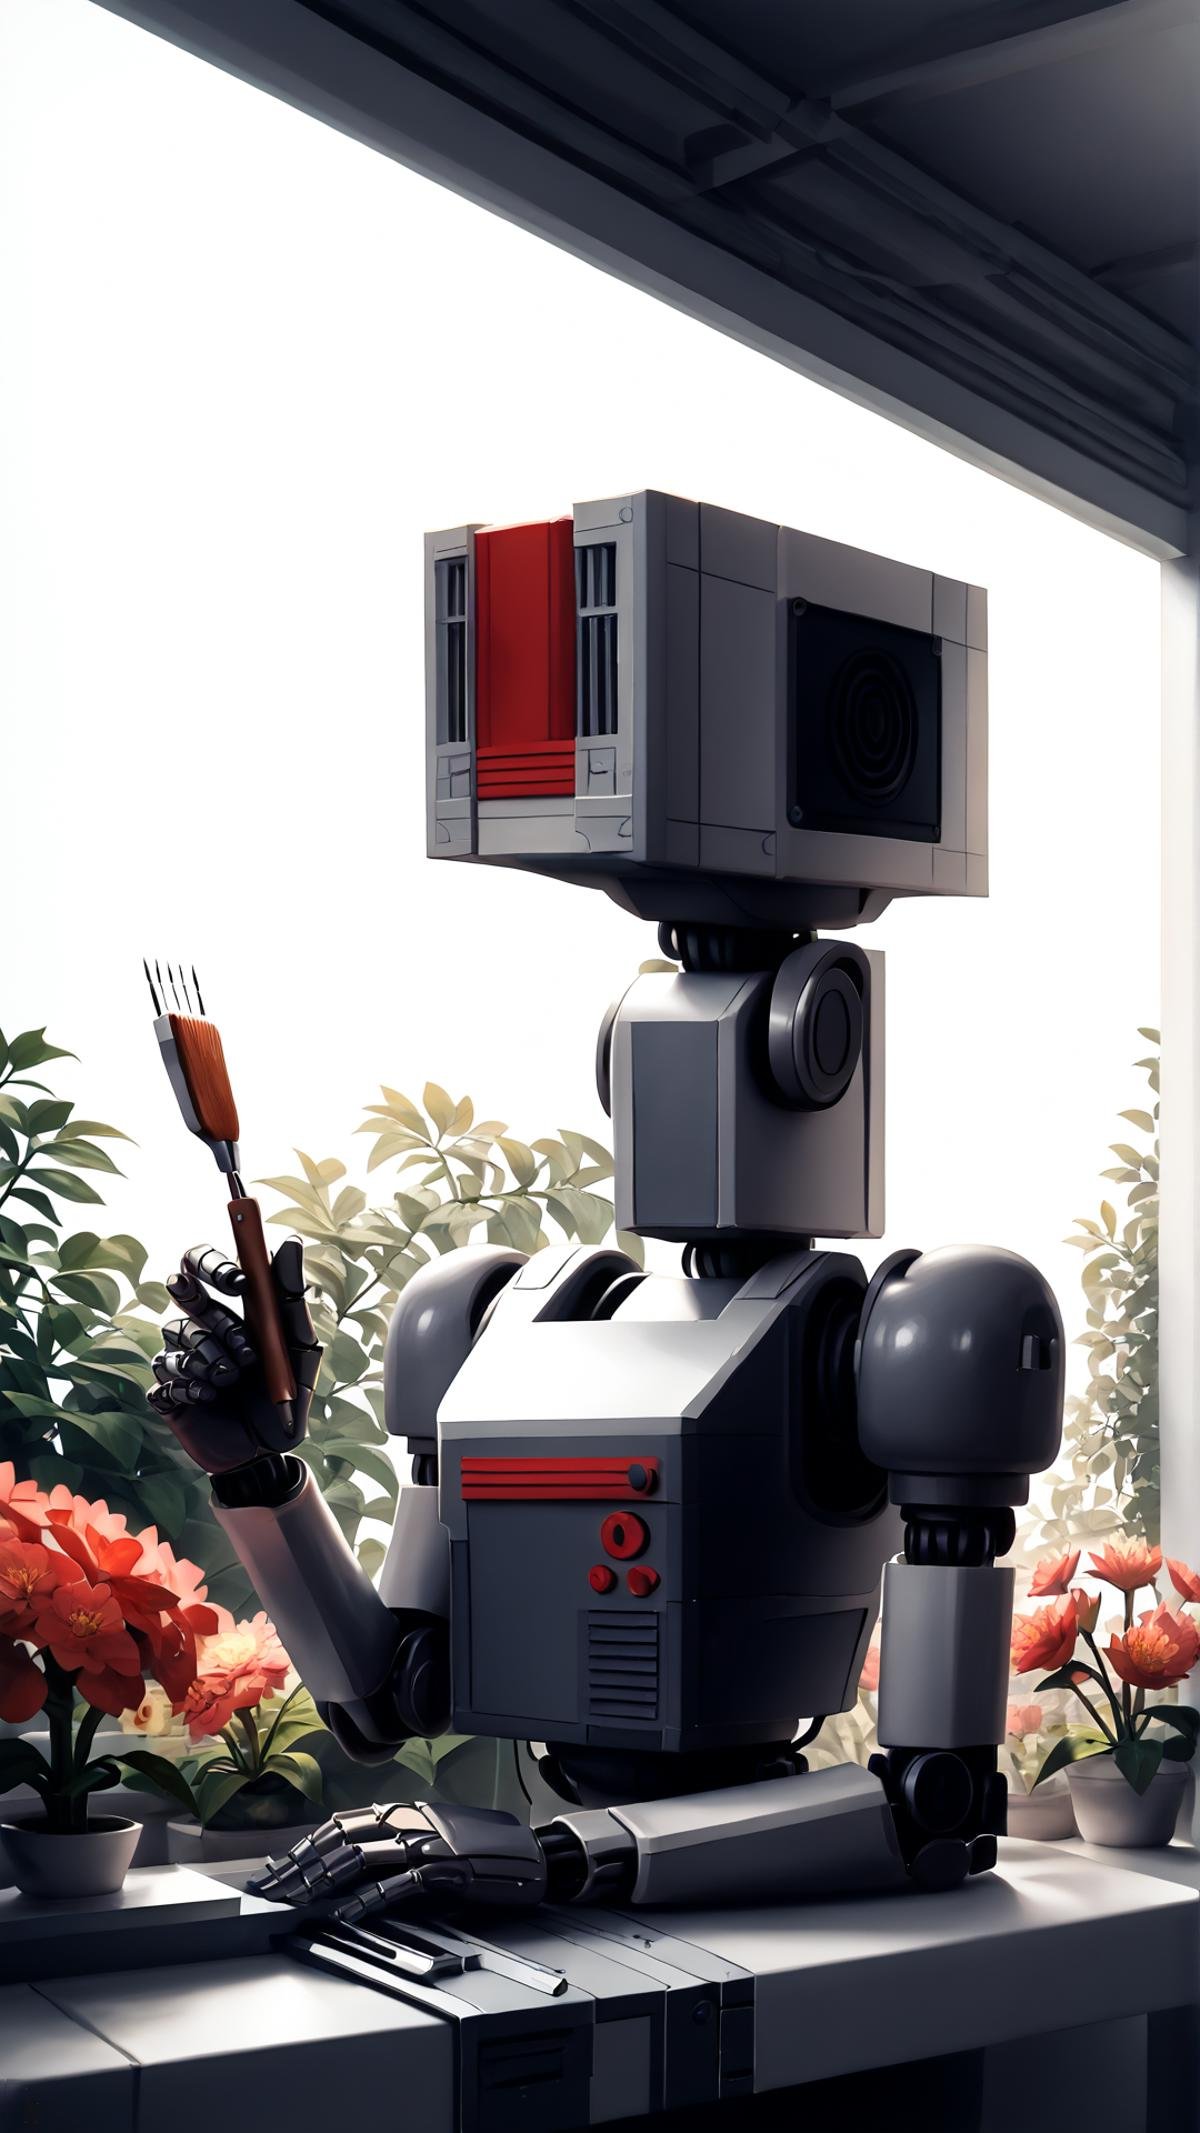 score_9, score_8_up, score_7_up, score_6_up, score_5_up, <lora:NESStylePony:0.9> NESStylePony made out of gray plastic, Realistic oil painting of a robot with a human-like appearance, holding a paintbrush in a vintage garden filled with flowers and gears entwined together, the robot is shown in a three-quarter view, soft sunlight filters through the garden creating warm tones, the robot's facial expression is one of curiosity and determination, the garden is overgrown with lush greenery and colorful flowers, the gears are a mix of copper and iron, with some showing signs of rust, the background is a blurred stone wall covered in ivy, the overall mood is serene and peaceful, the painting is highly detailed and textured, the canvas is slightly worn around the edges, the lighting is soft and warm, the atmosphere is tranquil and thought-provoking., <lora:Smooth Style 2 SDXL_LoRA_Pony Diffusion V6 XL:0.75> <lora:add-detail-xl:1.5>, Nintendo design, gray, red, (Masterpiece:1.3) (best quality:1.2) (high quality:1.1)